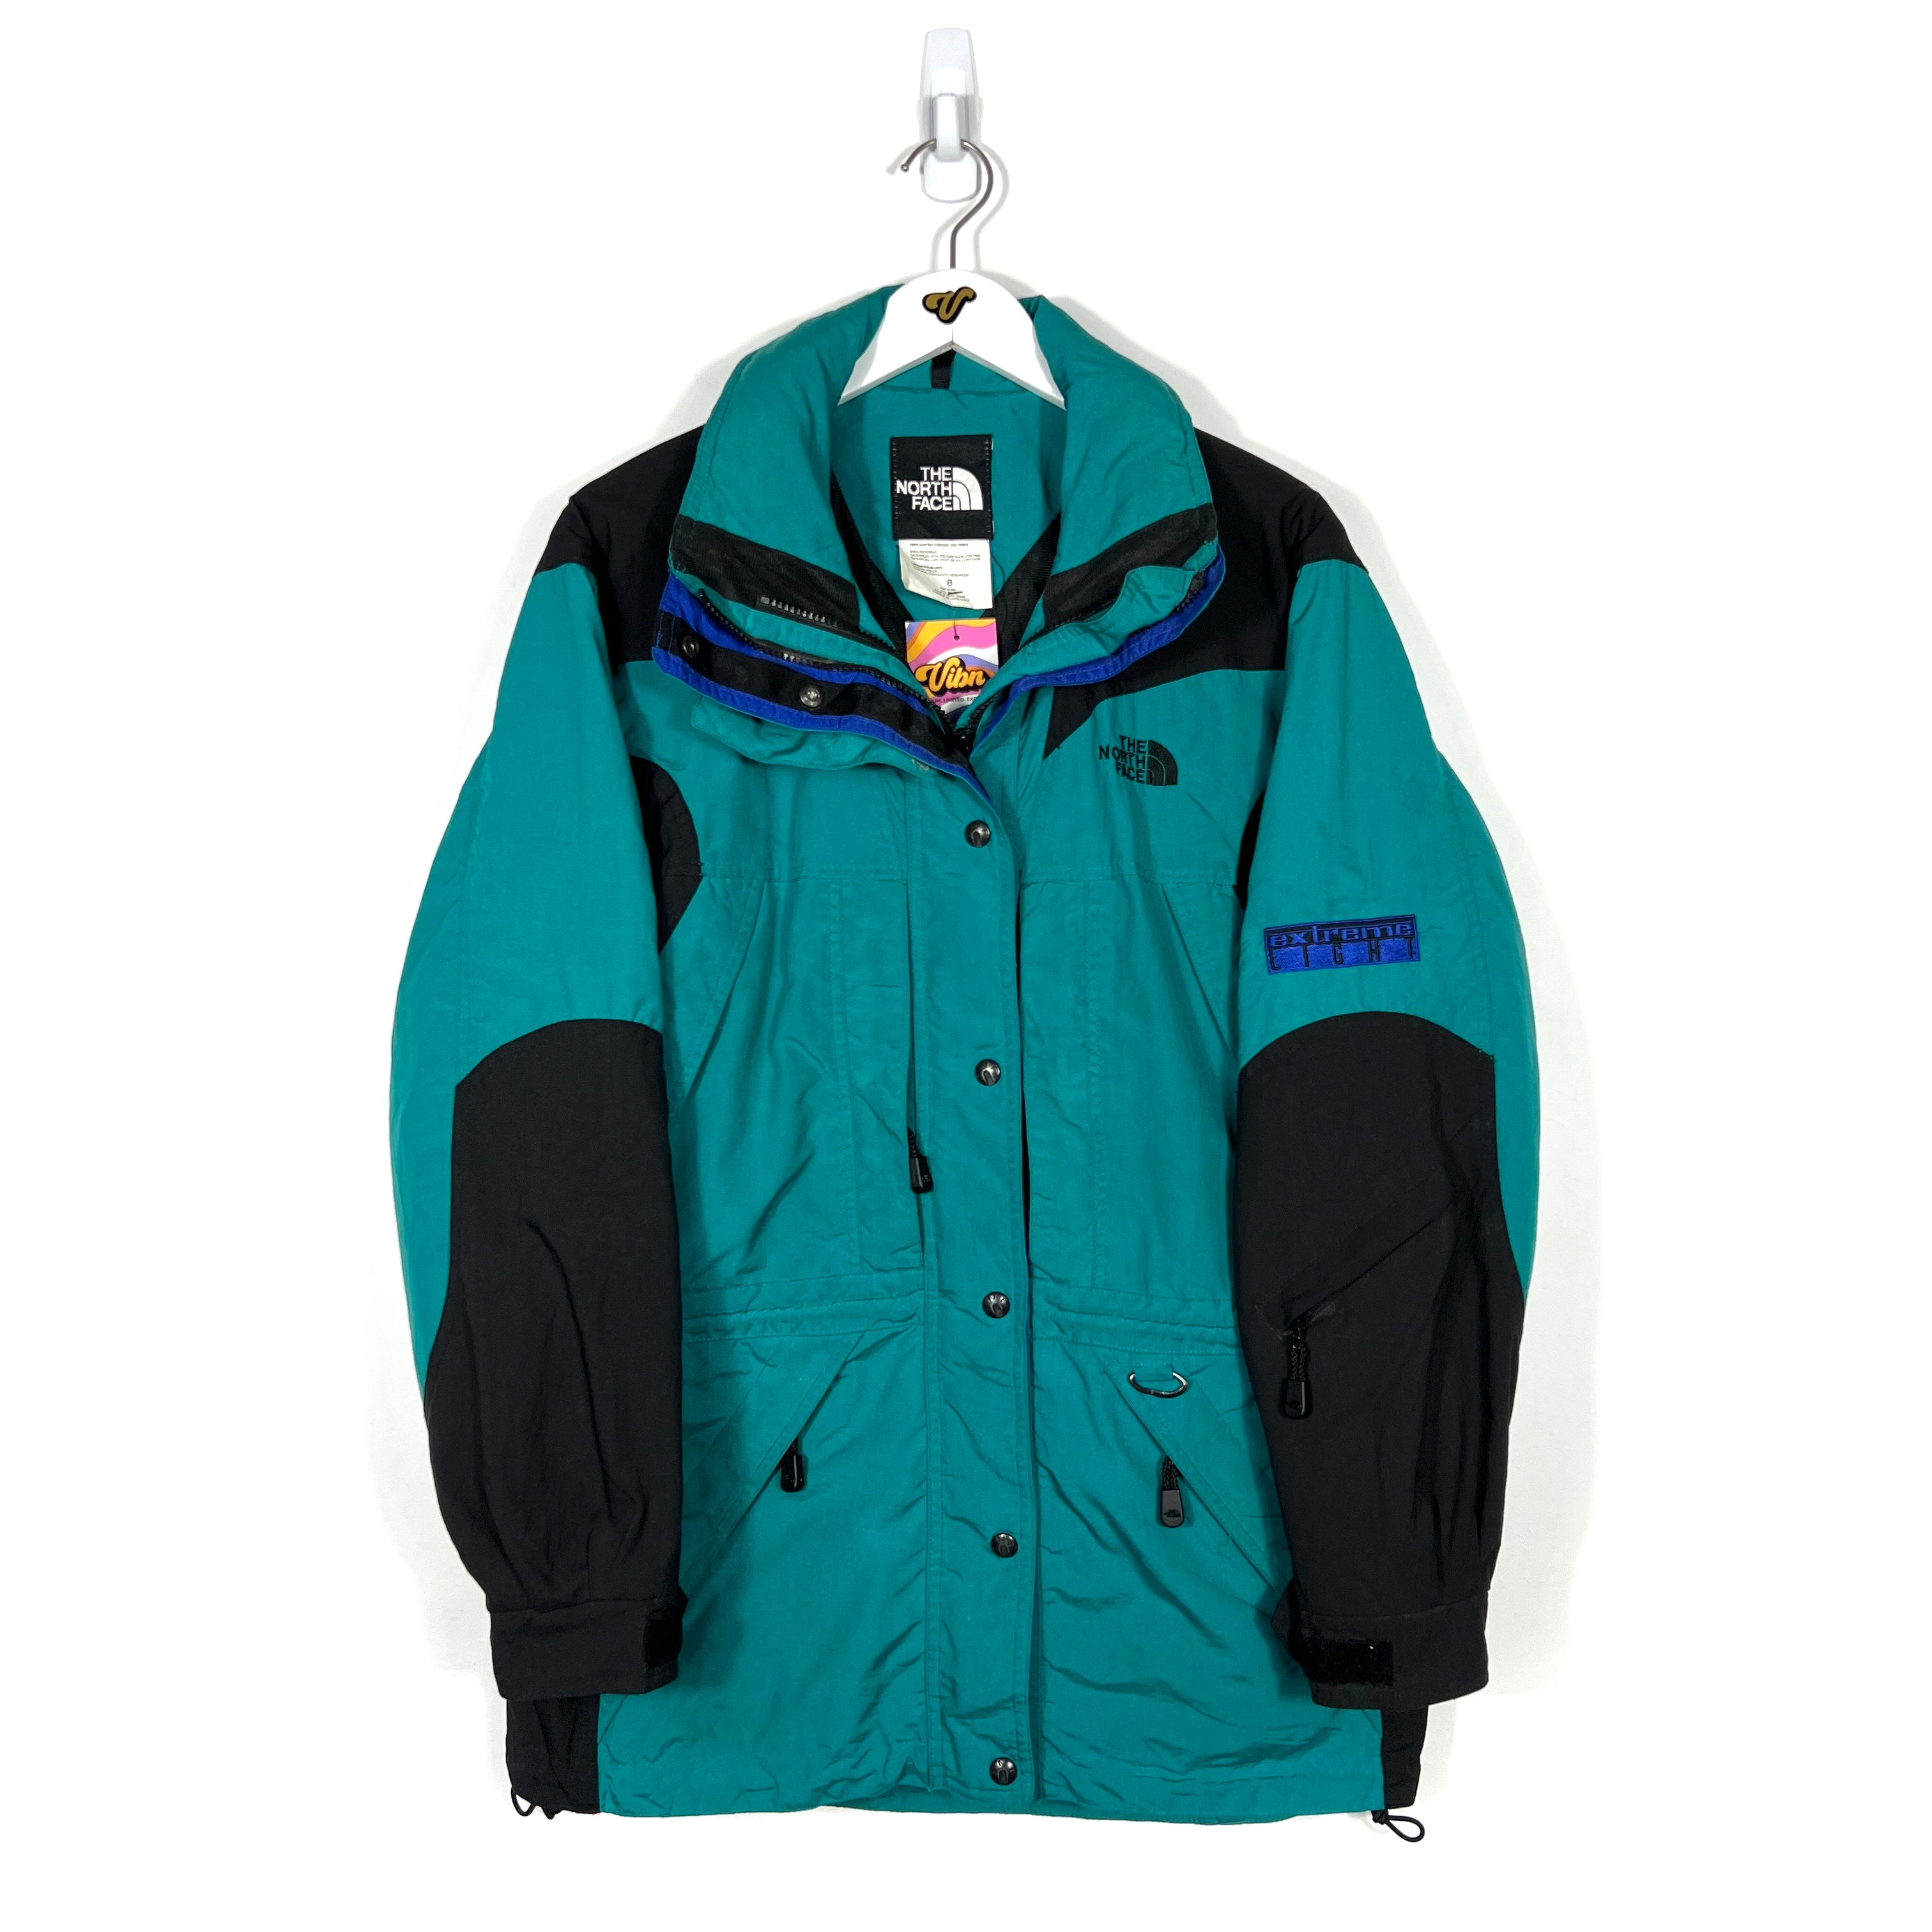 Vintage The North Face Extreme Light Insulated Jacket - Women's Medium